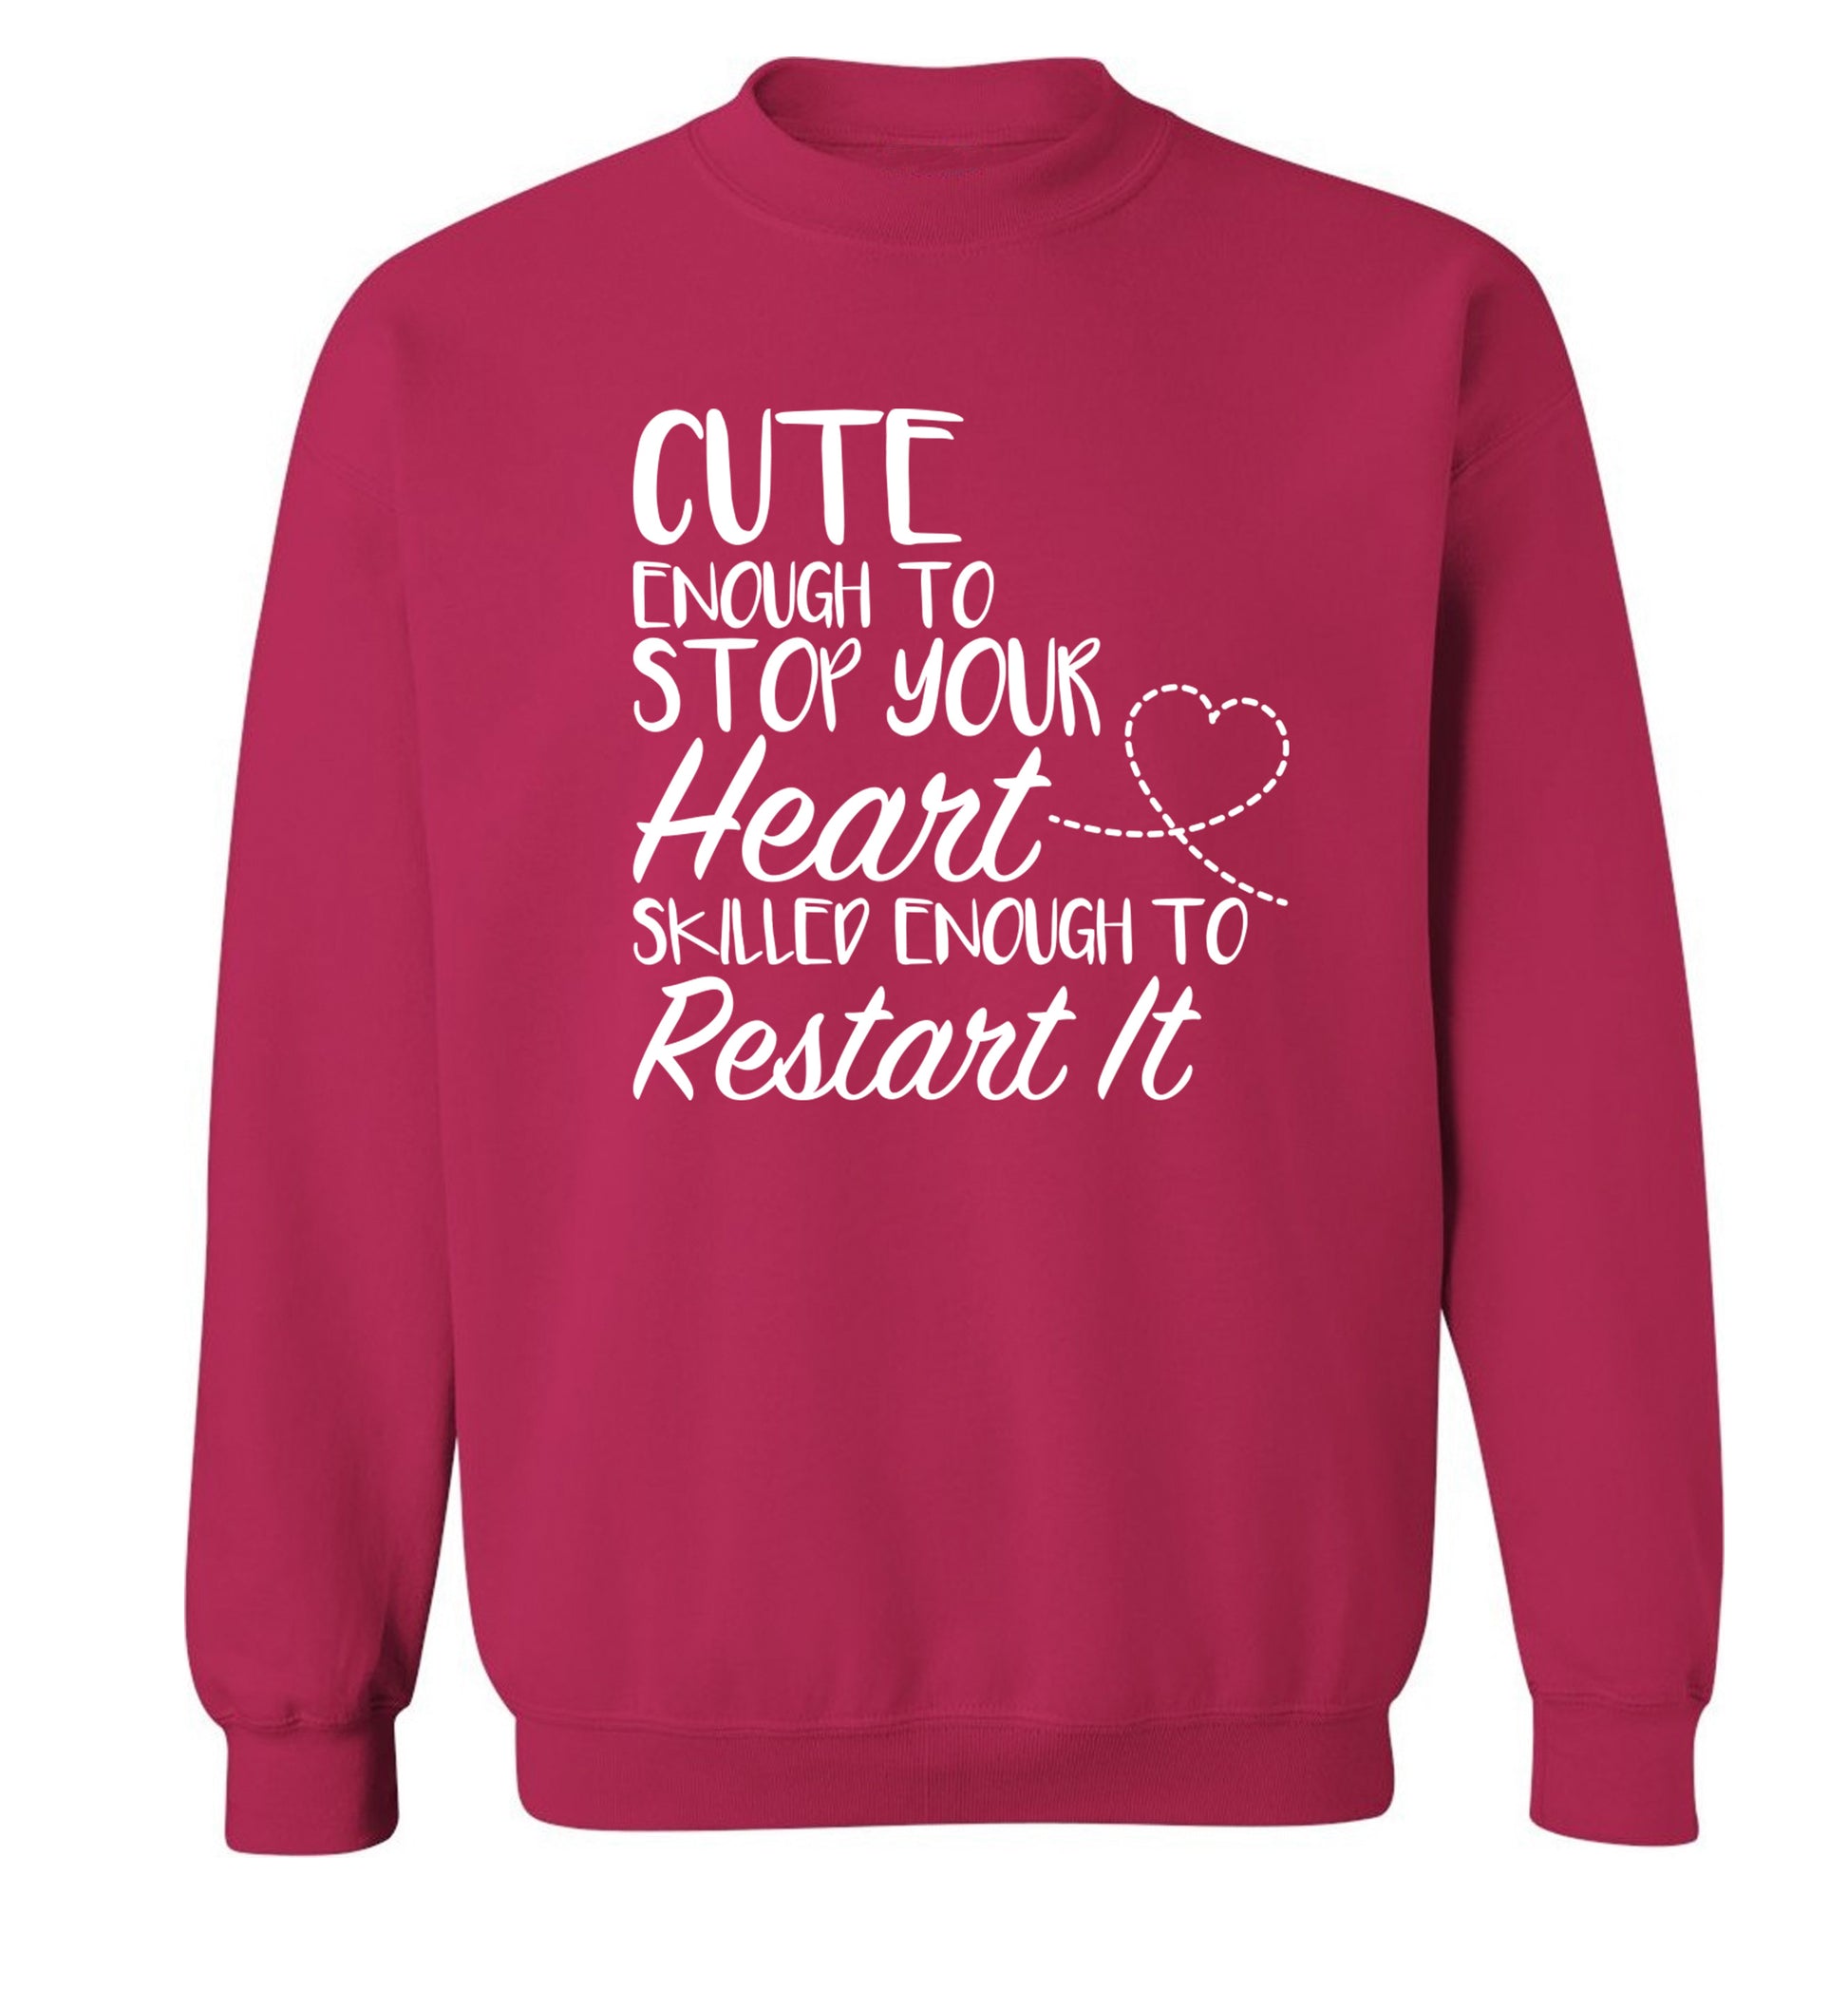 Cute enough to stop your heart skilled enough to restart it Adult's unisex pink Sweater 2XL